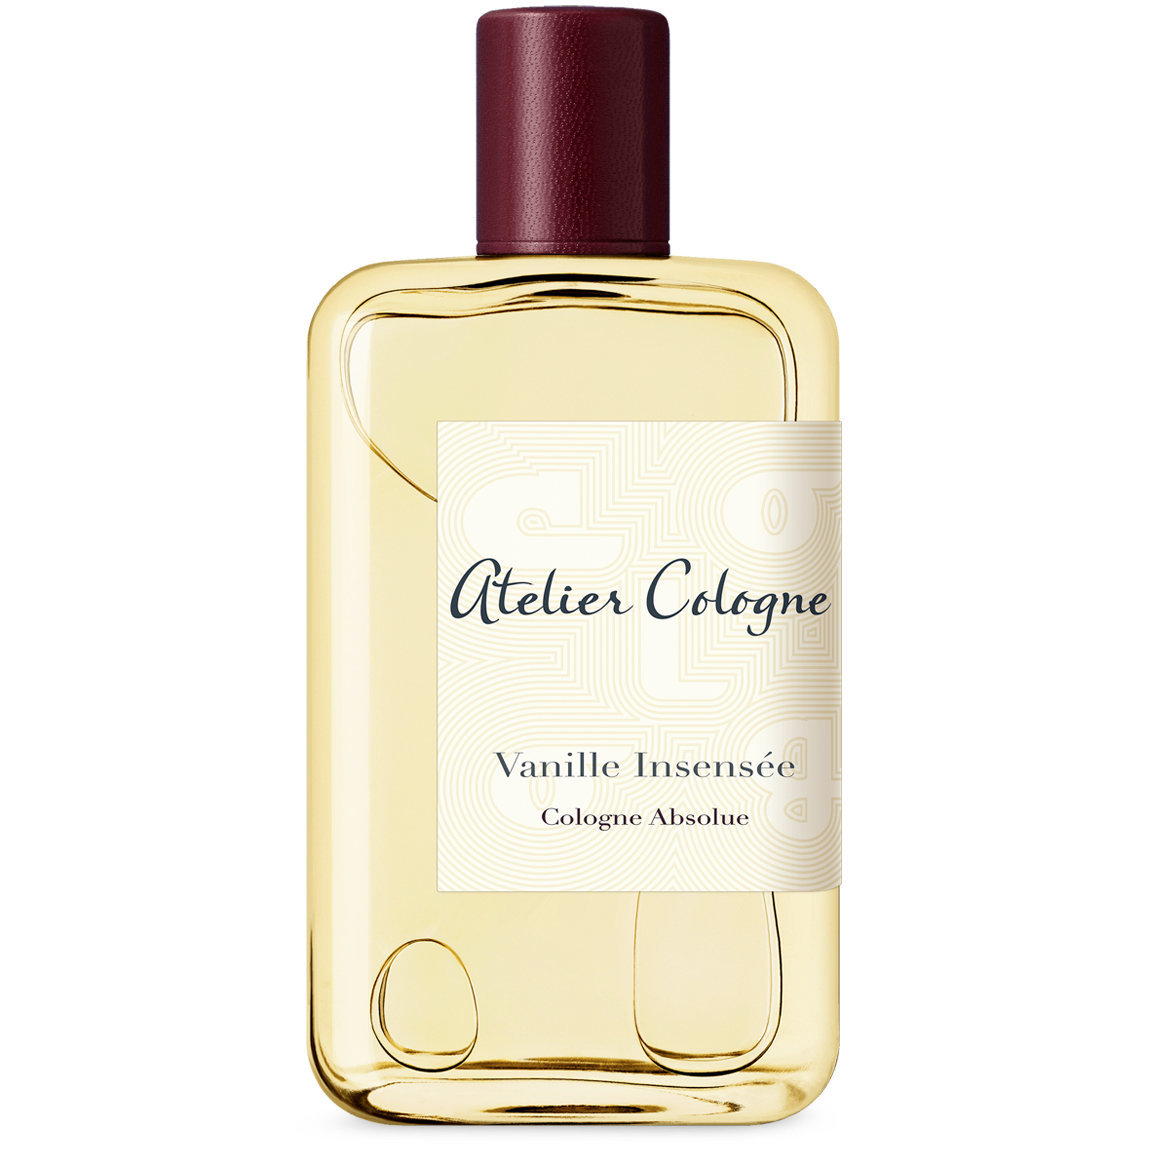 Atelier Cologne Vanille Insensée 200 ml alternative view 1 - product swatch.